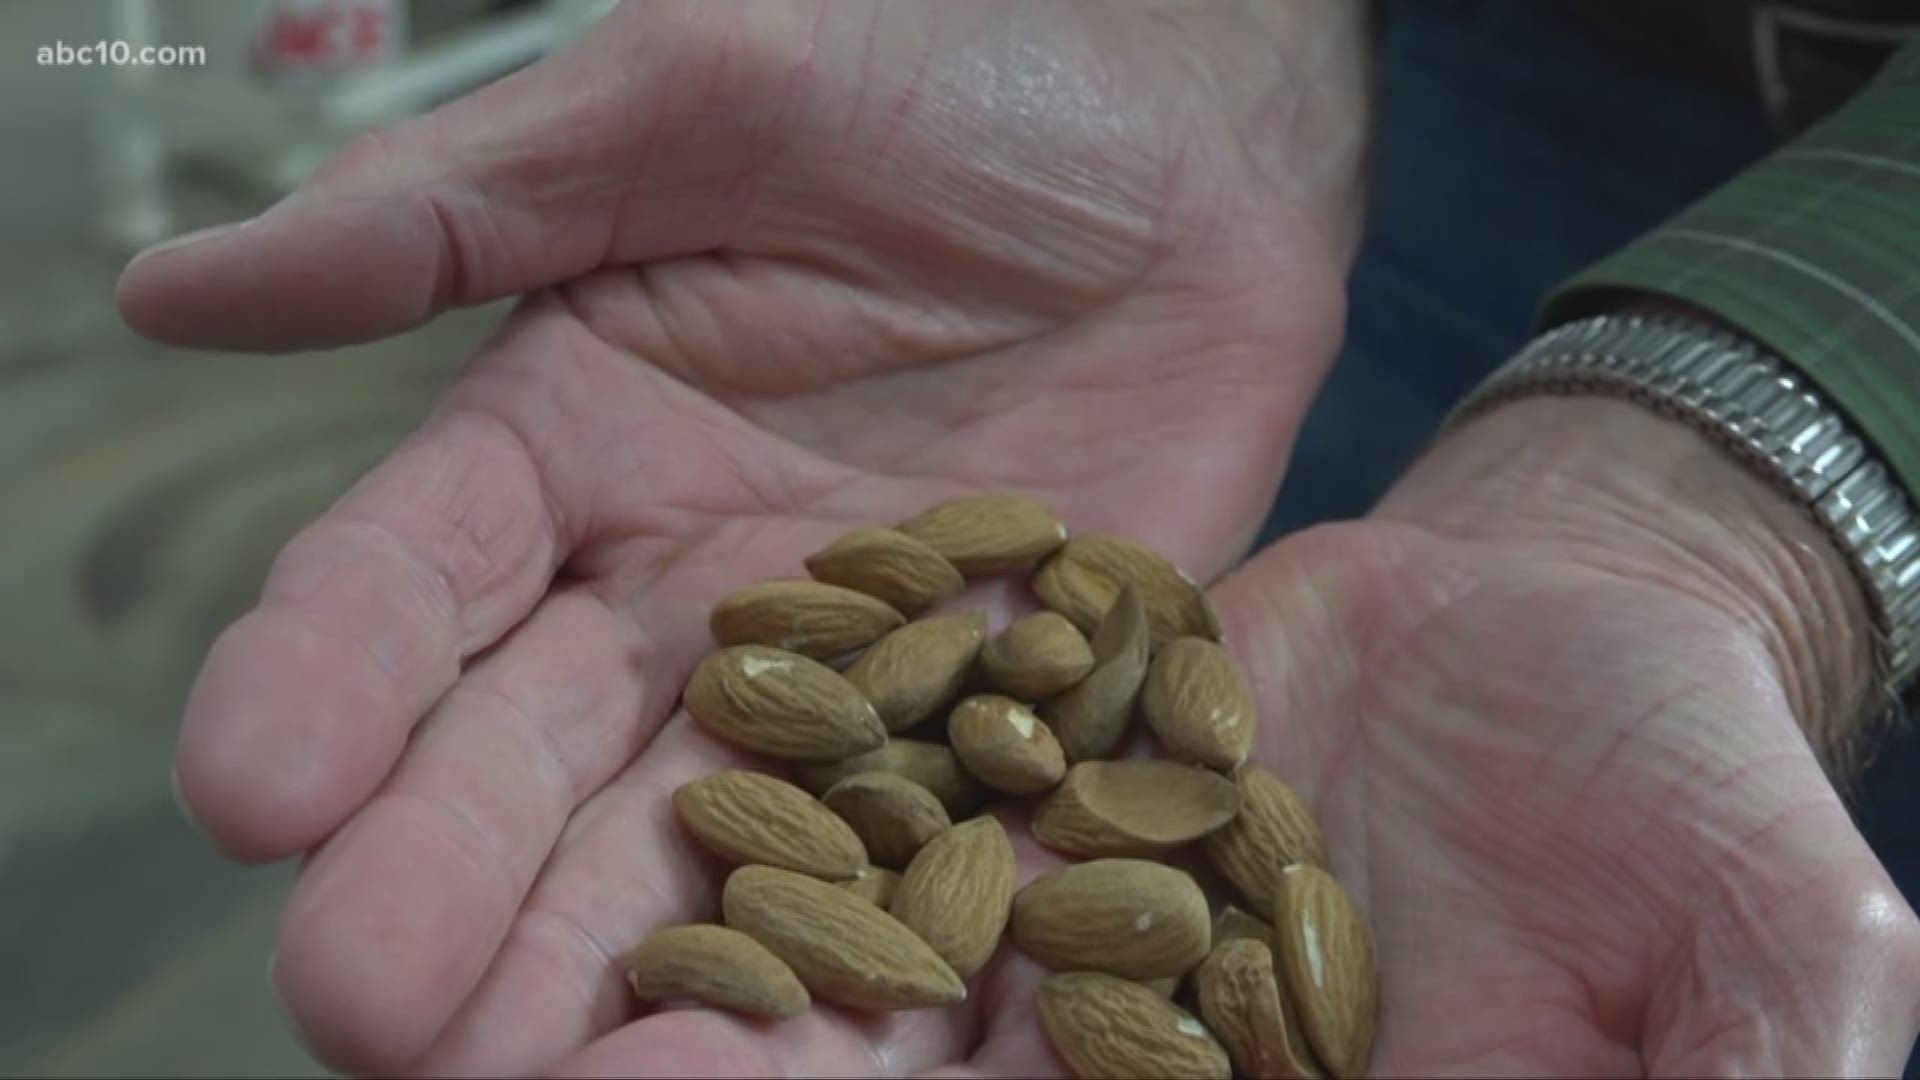 The deal with China mentions the big crops commonly grown in the Midwest like corn and soybeans. What it fails to mention is specialty crops like almonds.